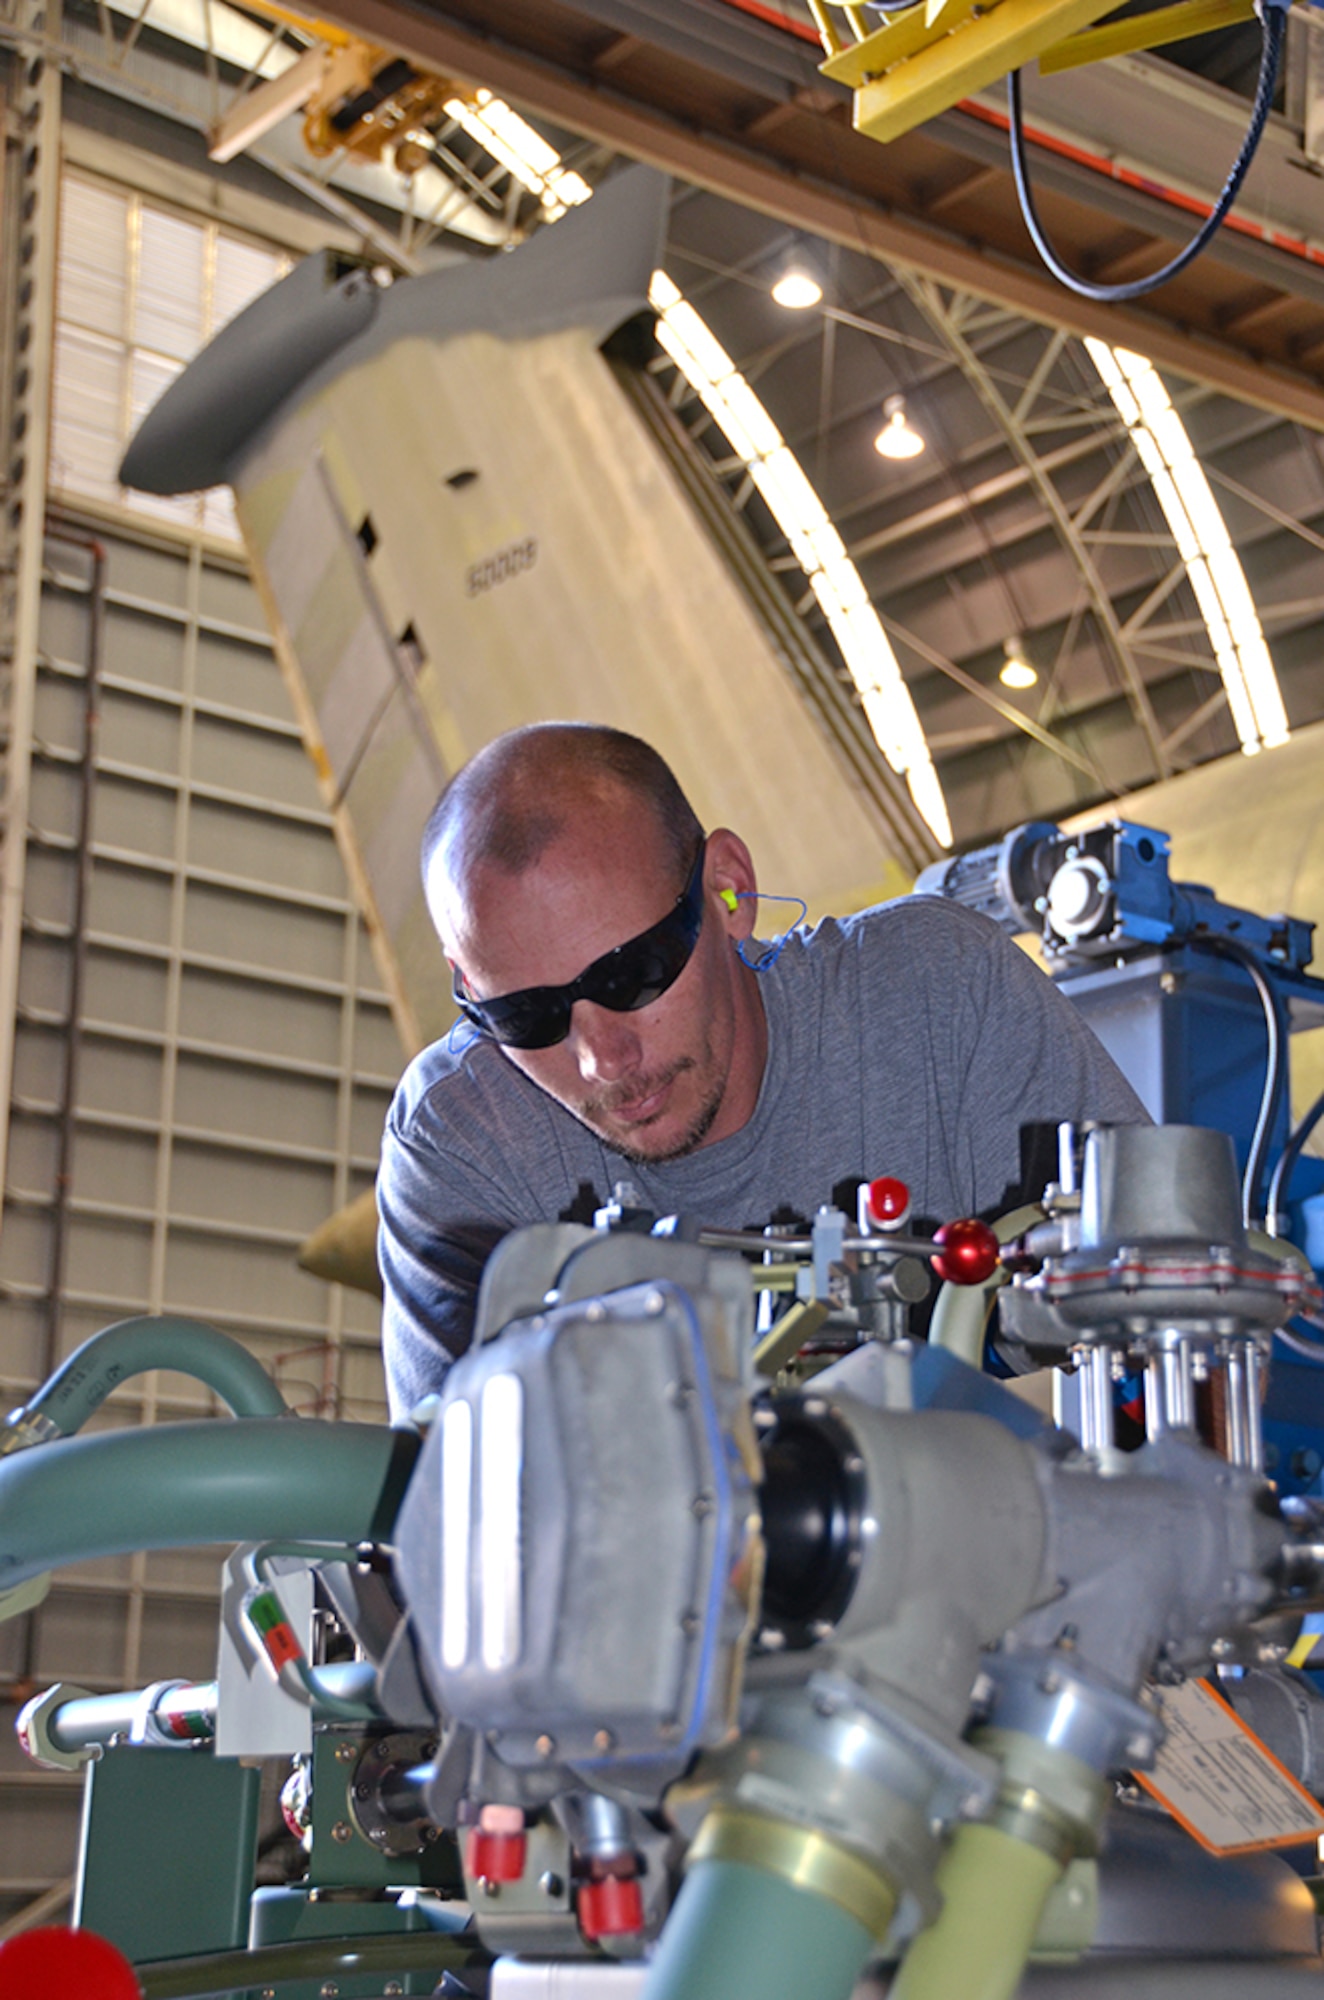 Ian Bare, Fuels, inspects a removed C-5 Fuel Tank Pressurization System (Dewar). Two 800-liter Dewar storage tanks pressurize the C-5 Galaxy’s fuel tanks and are located on each side of the aircraft. (U.S. Air Force photo/Tech. Sgt. Kelly Goonan/released)